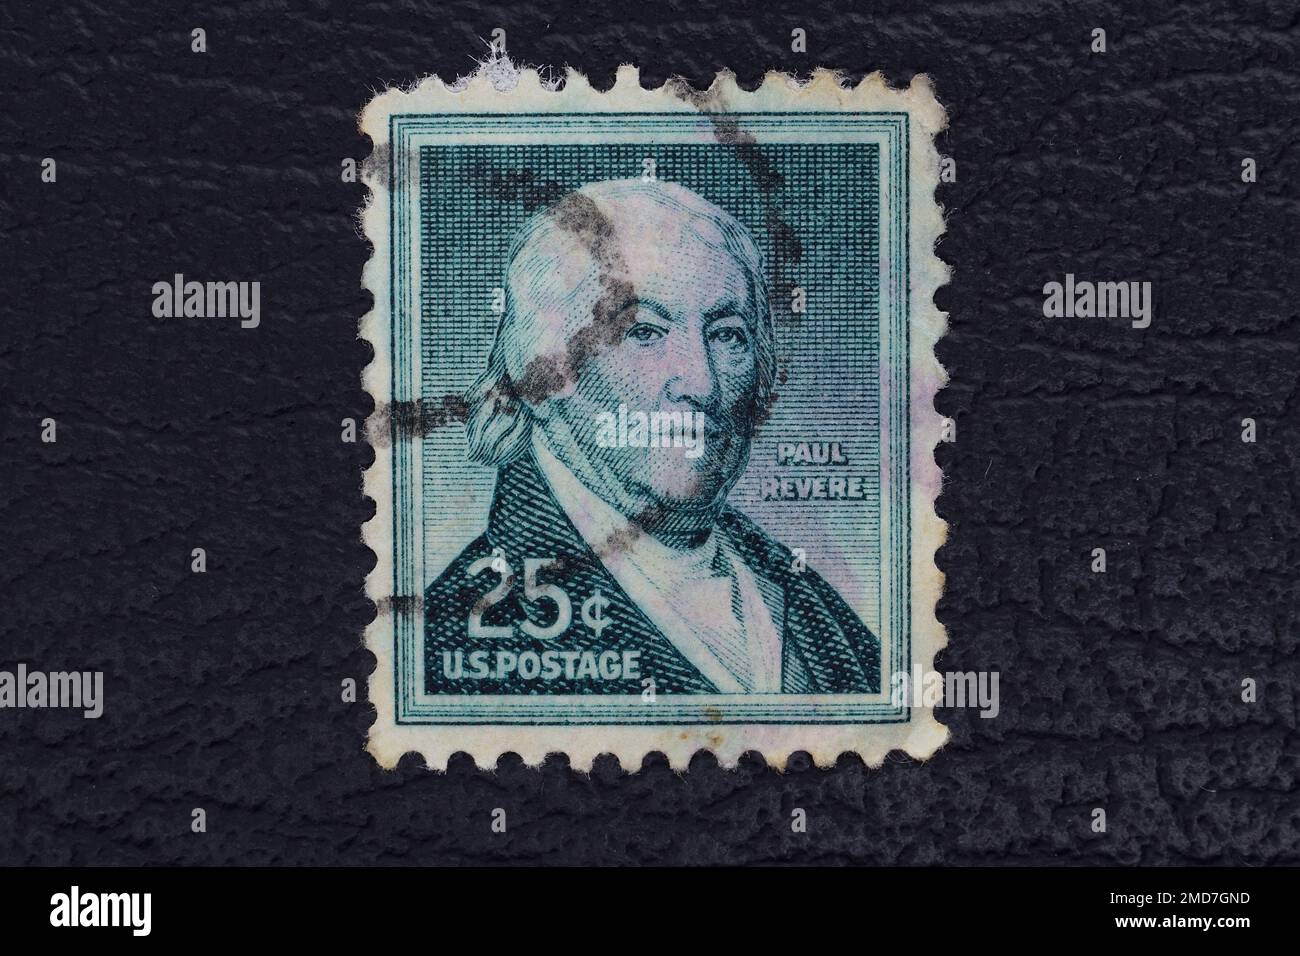 Valverde (CT), Italy - January 15, 2023: a old postage stamp from USA showing a drawing of Paul Revere Stock Photo